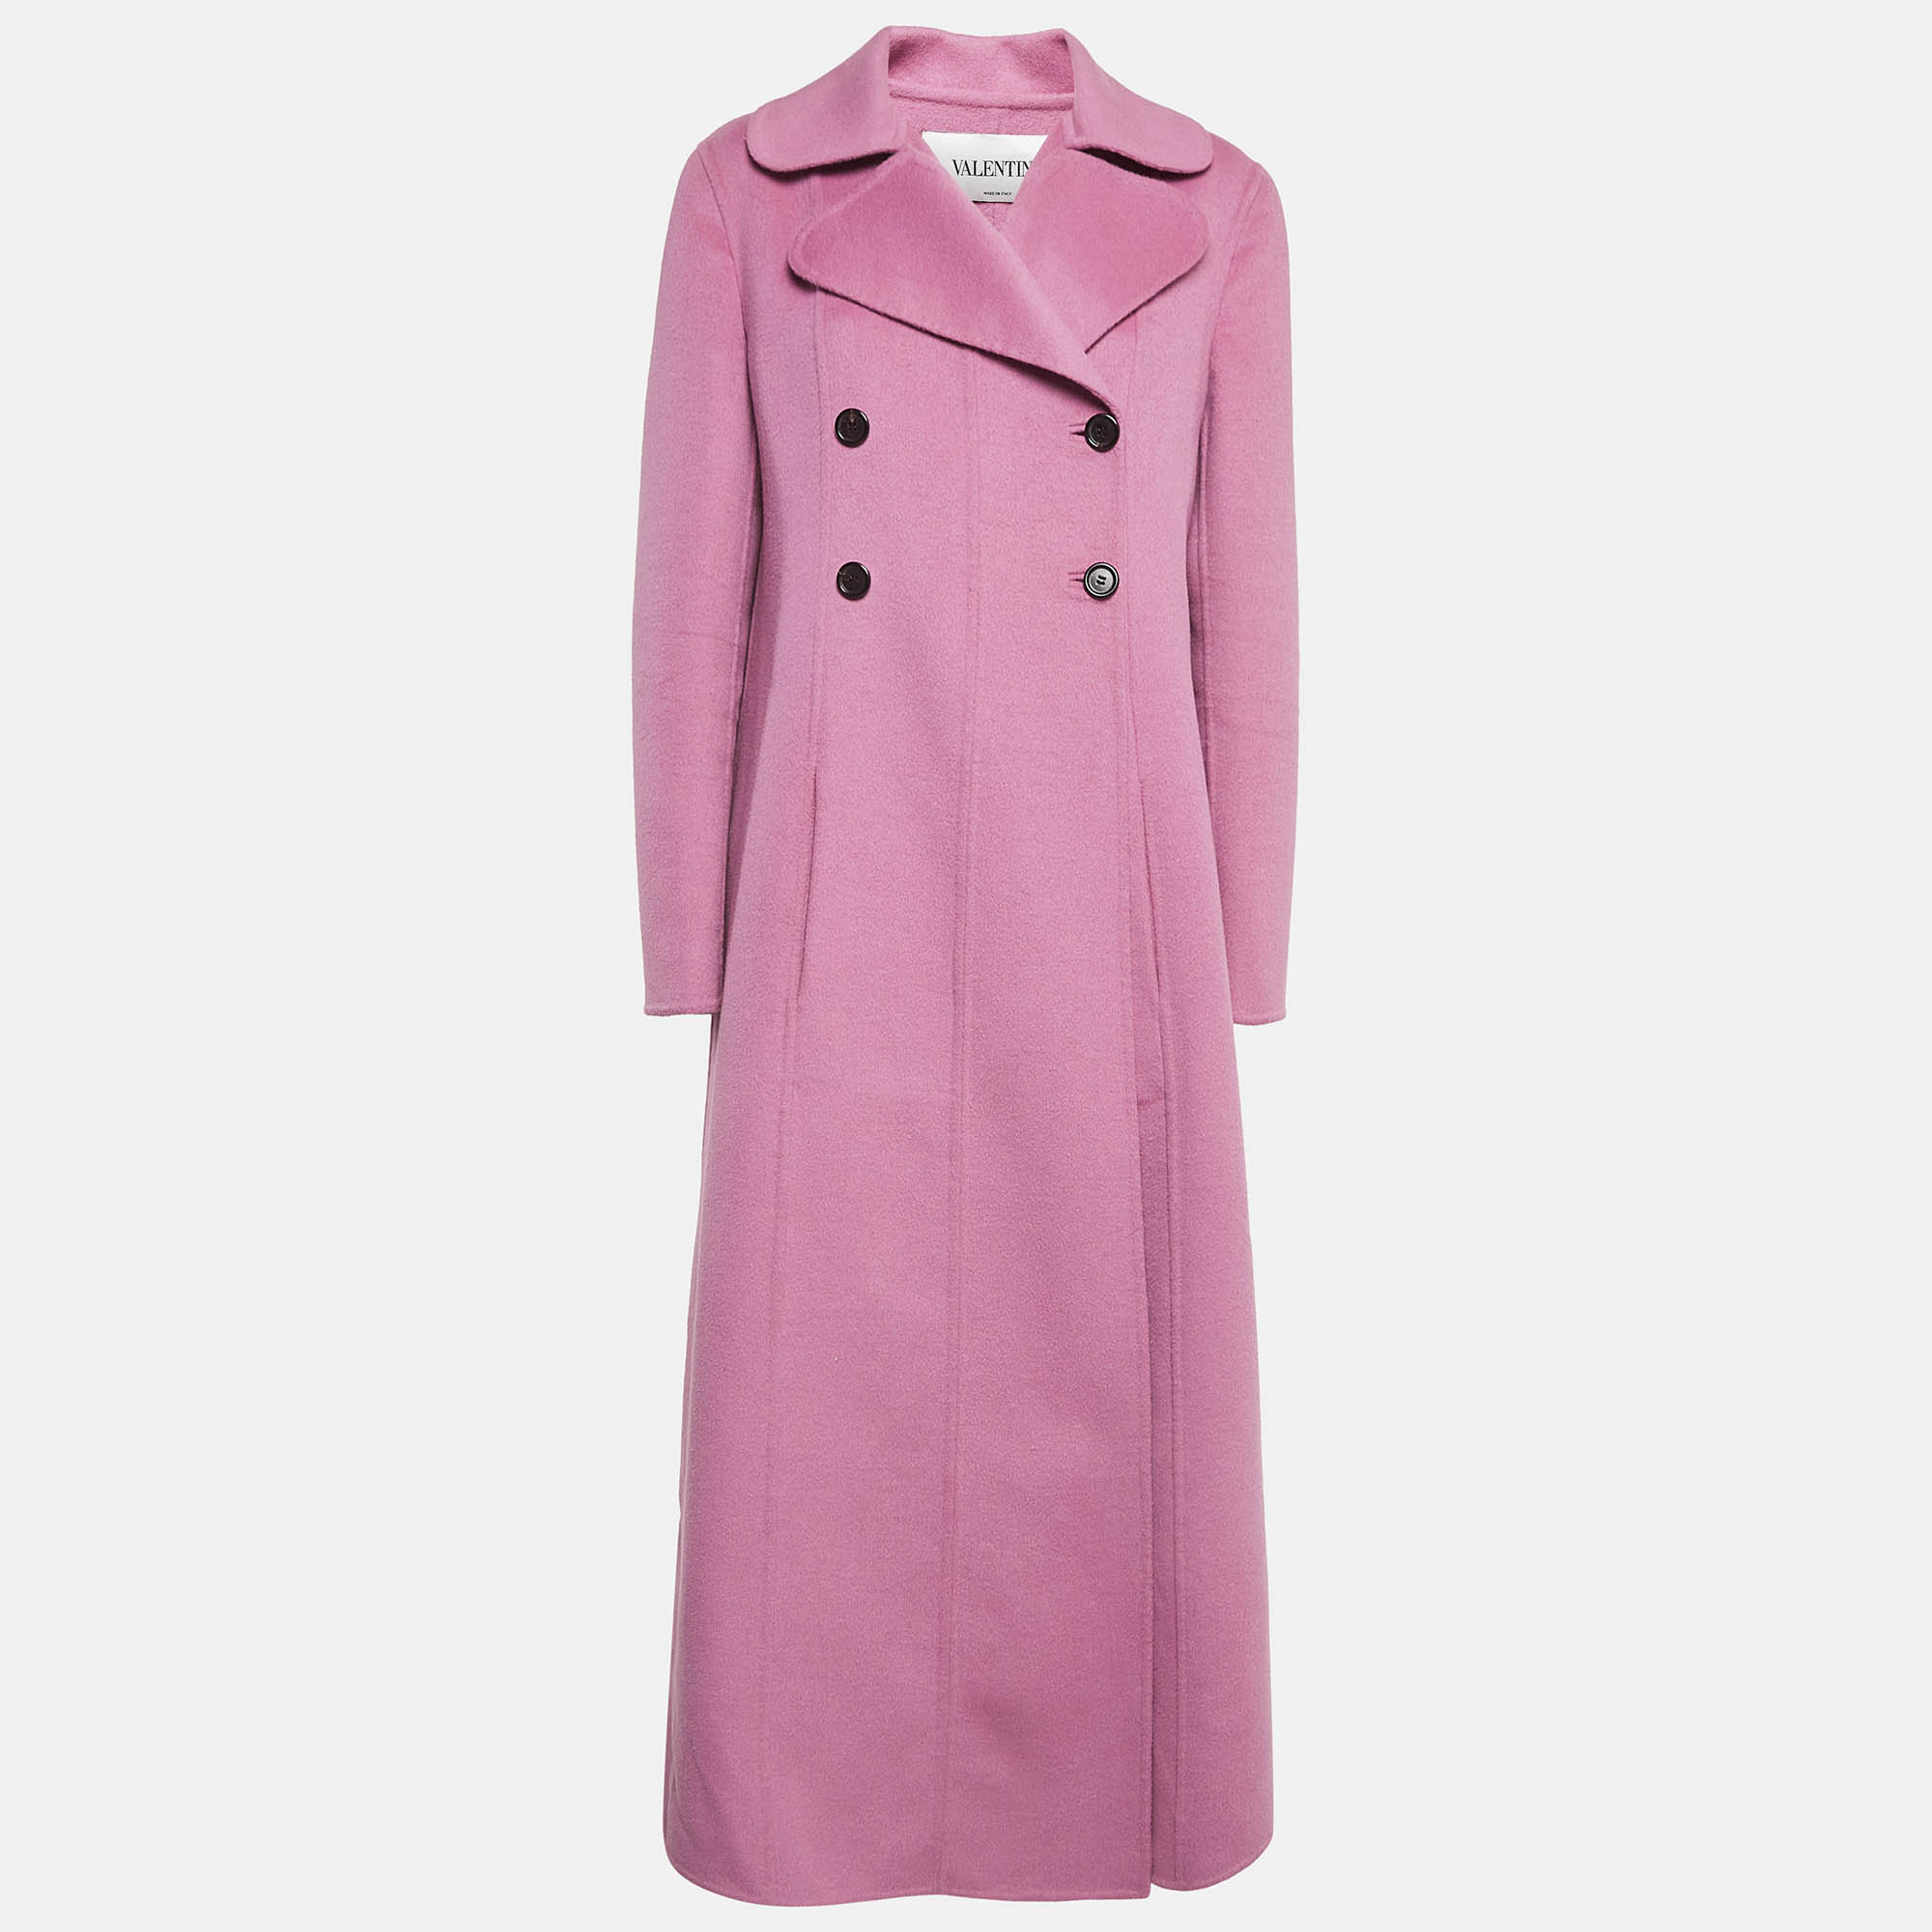 Valentino pink wool double breasted long coat l